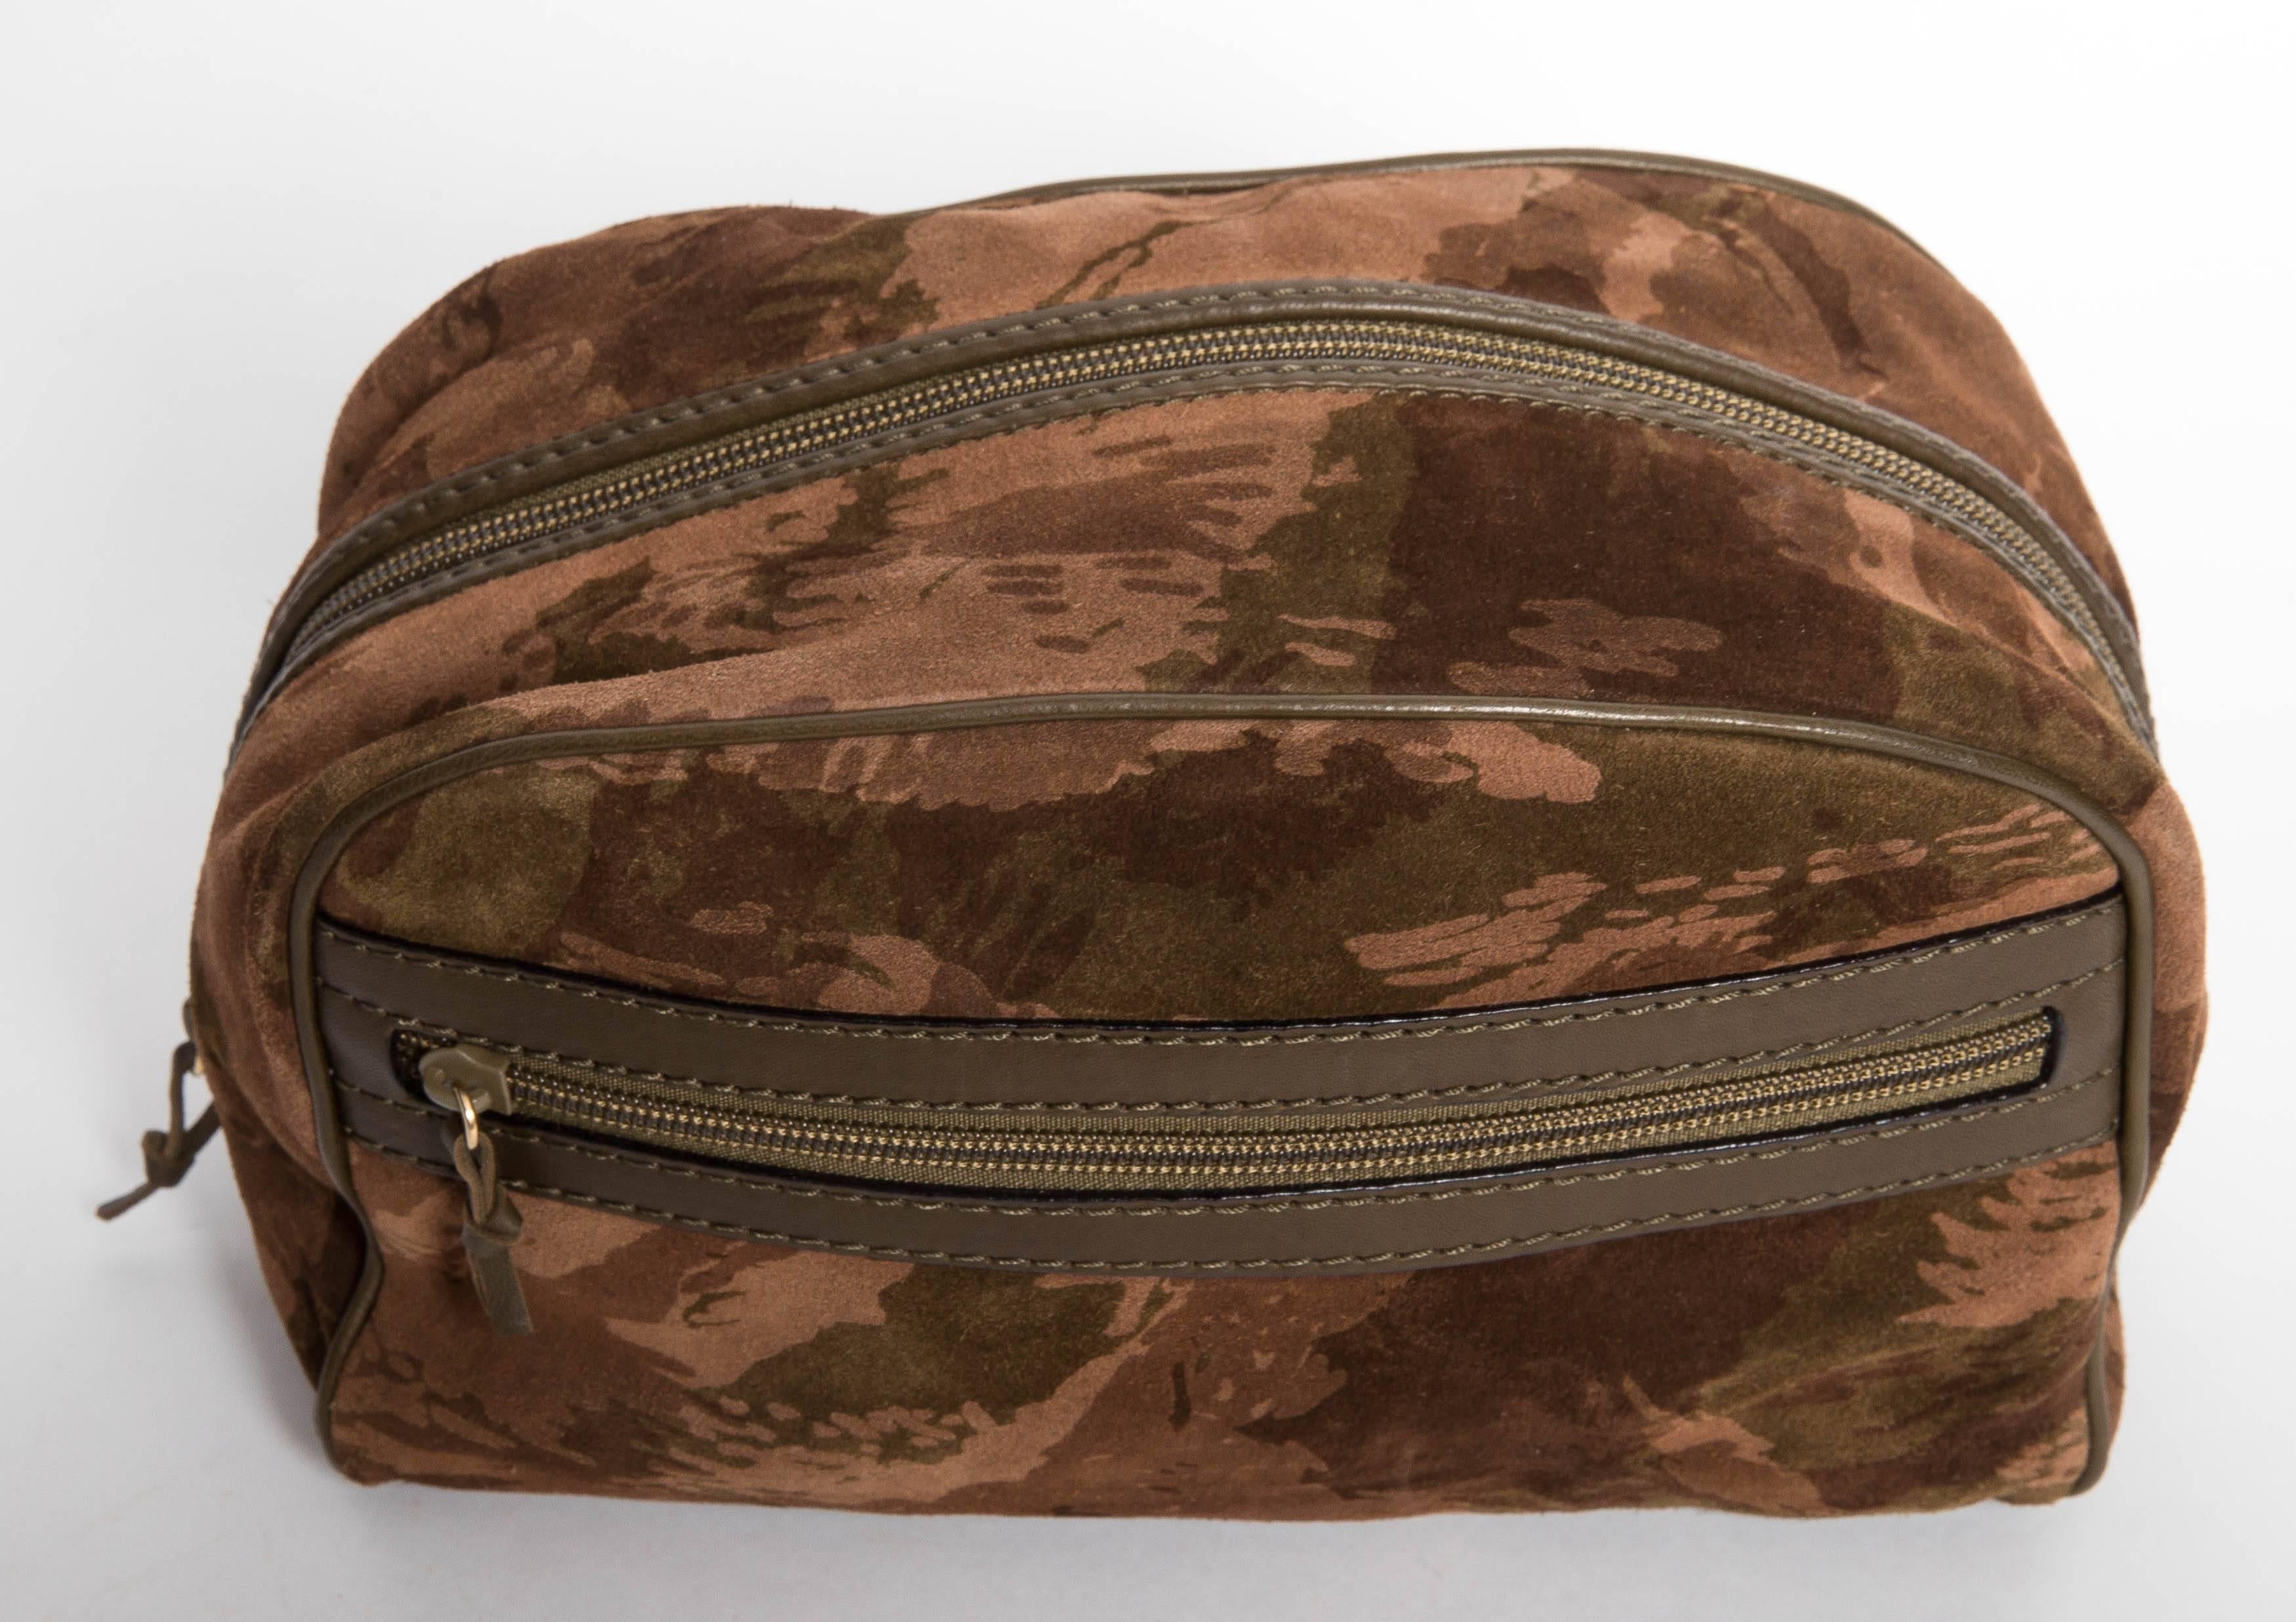 Bottega Veneta Camouflage Suede Dopp Kit In Excellent Condition For Sale In Westhampton Beach, NY